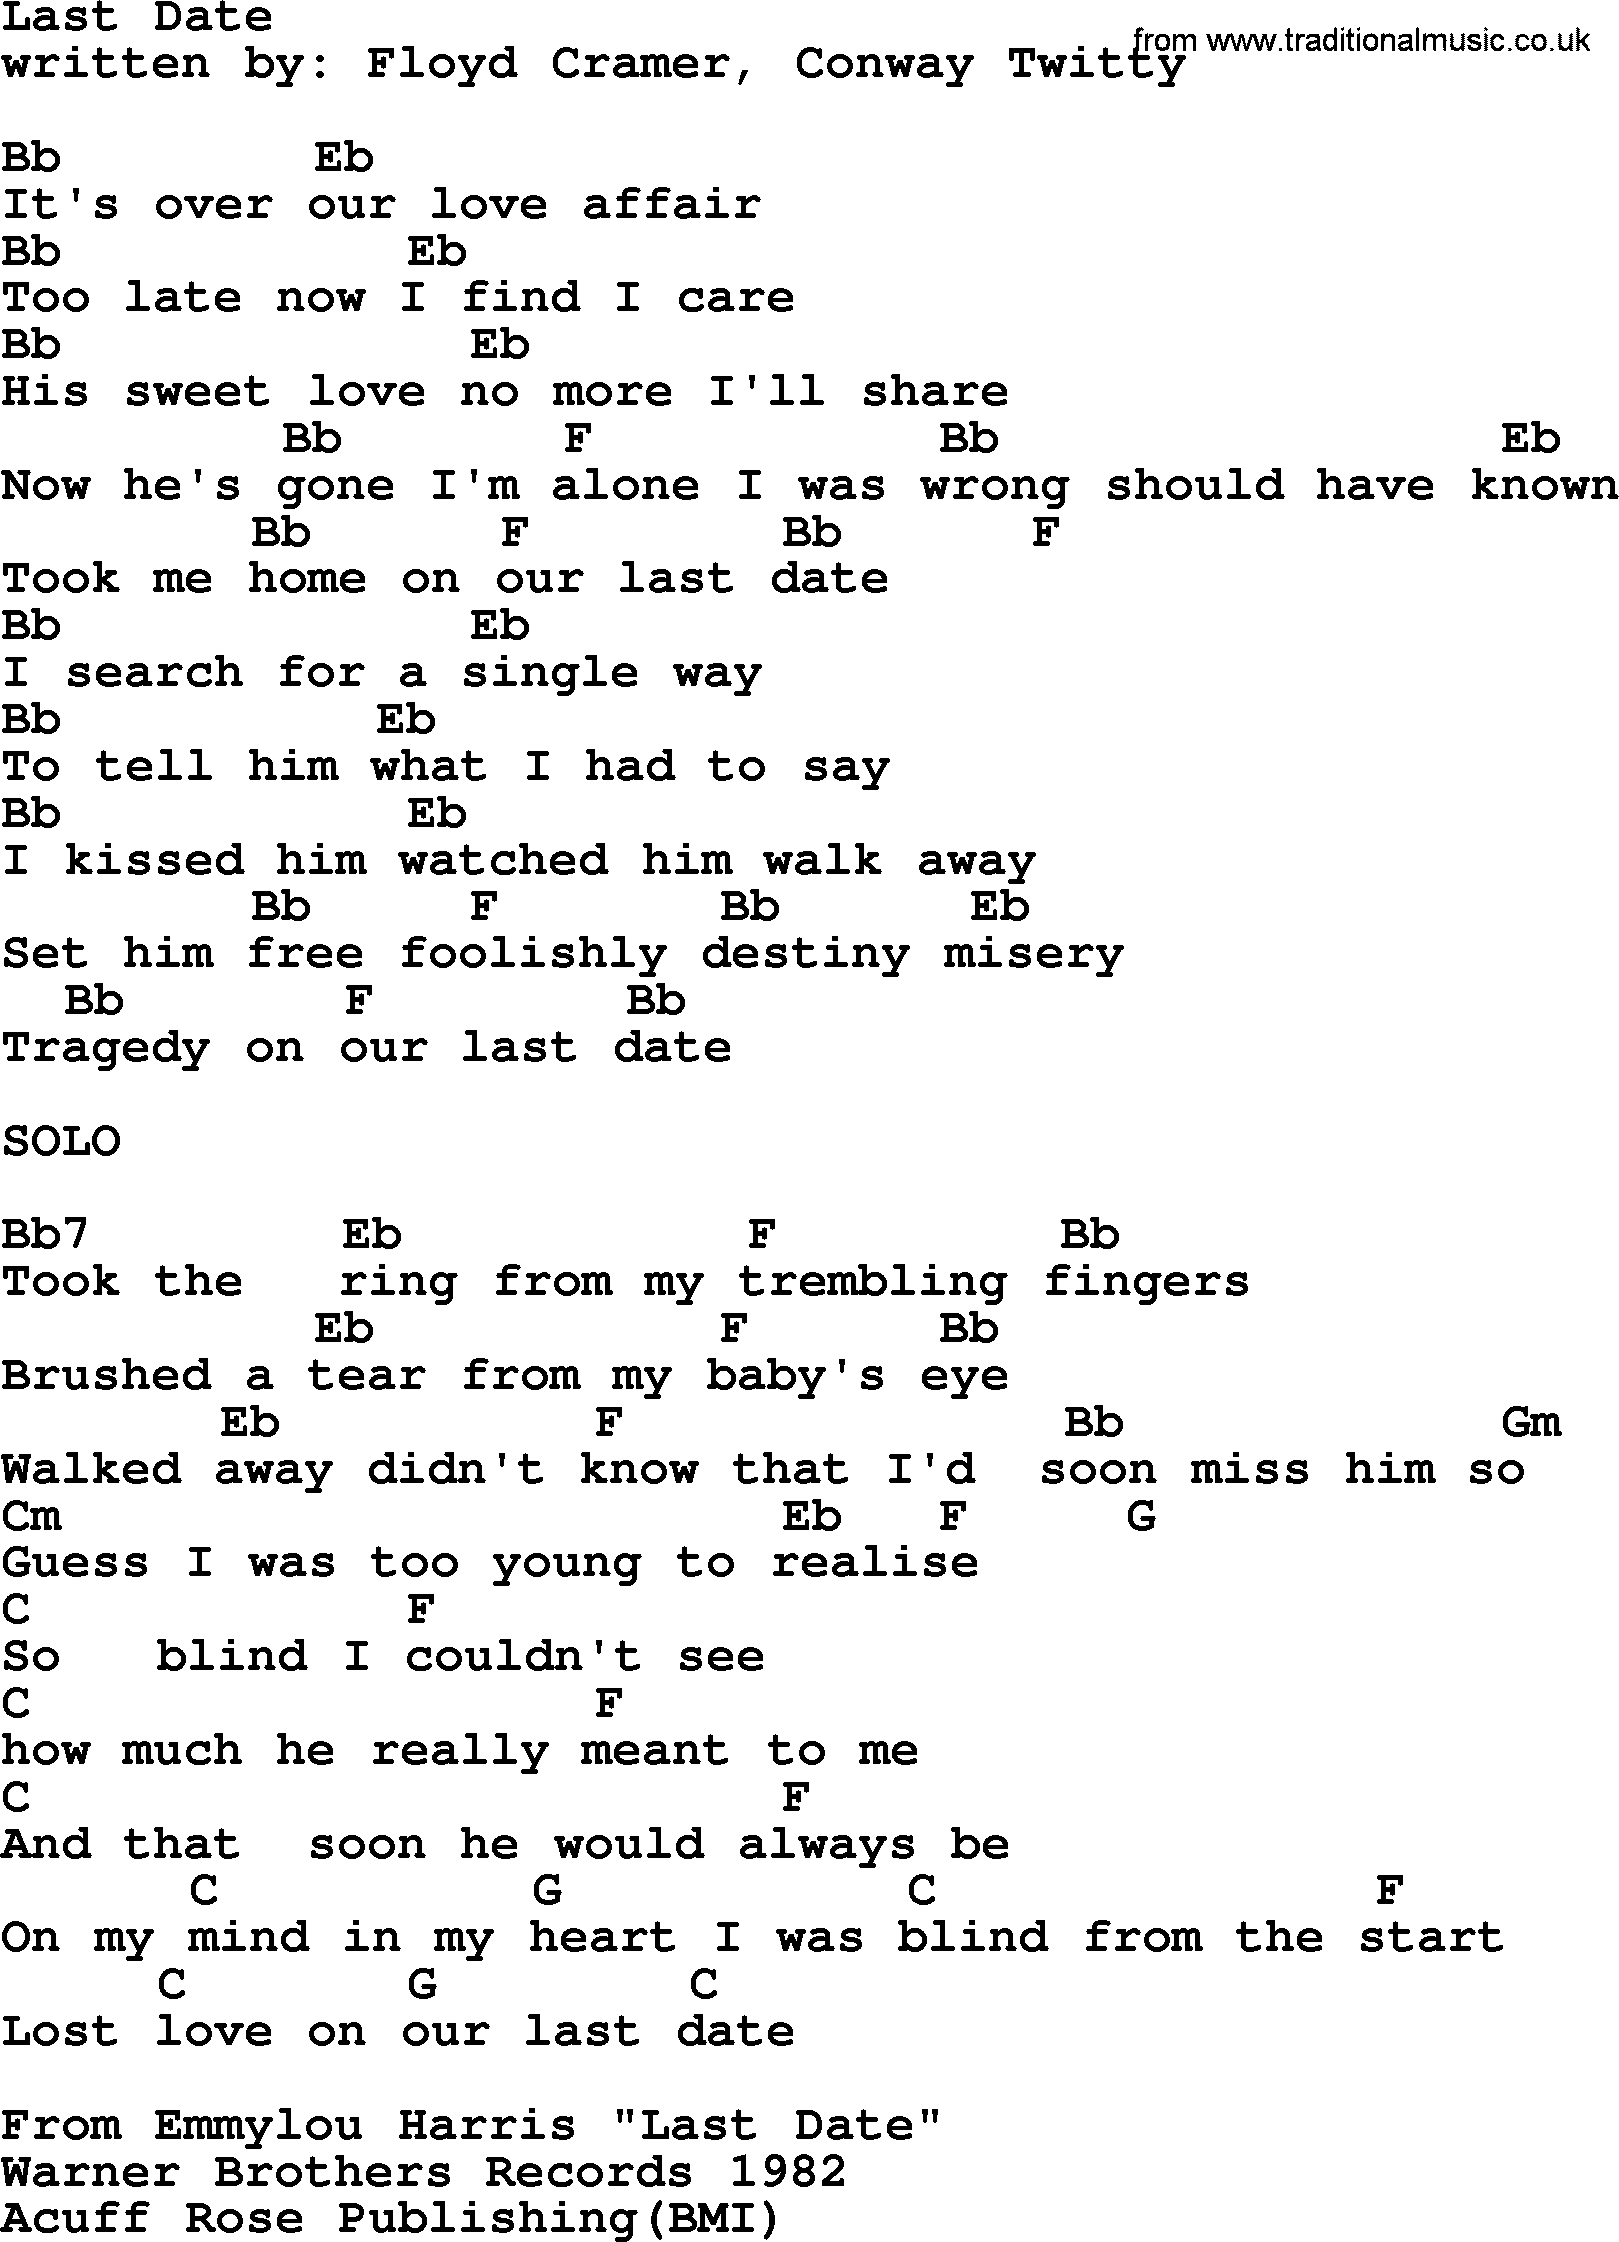 Emmylou Harris song: Last Date lyrics and chords